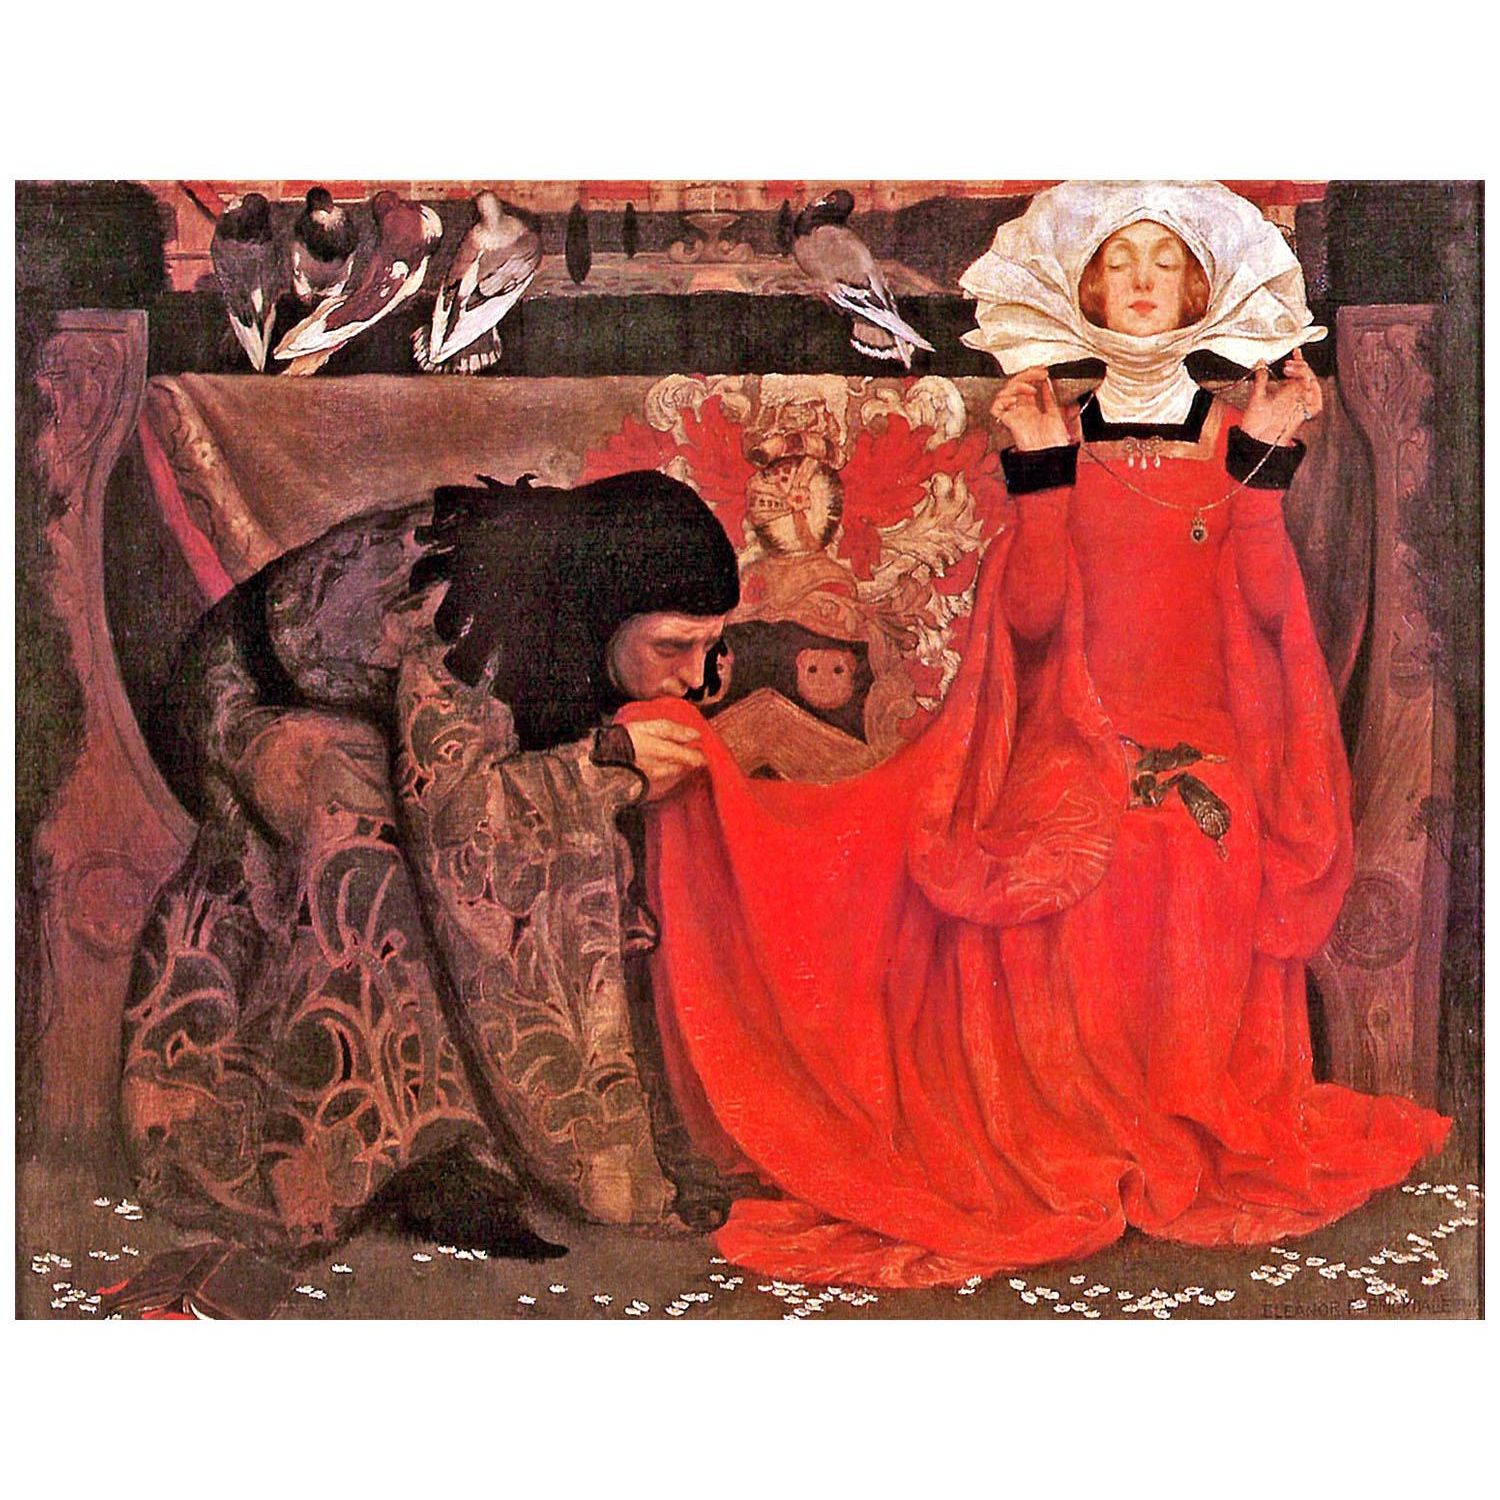 Eleanor Fortescue-Brickdale. The Pale Complexion of True Love. 1899